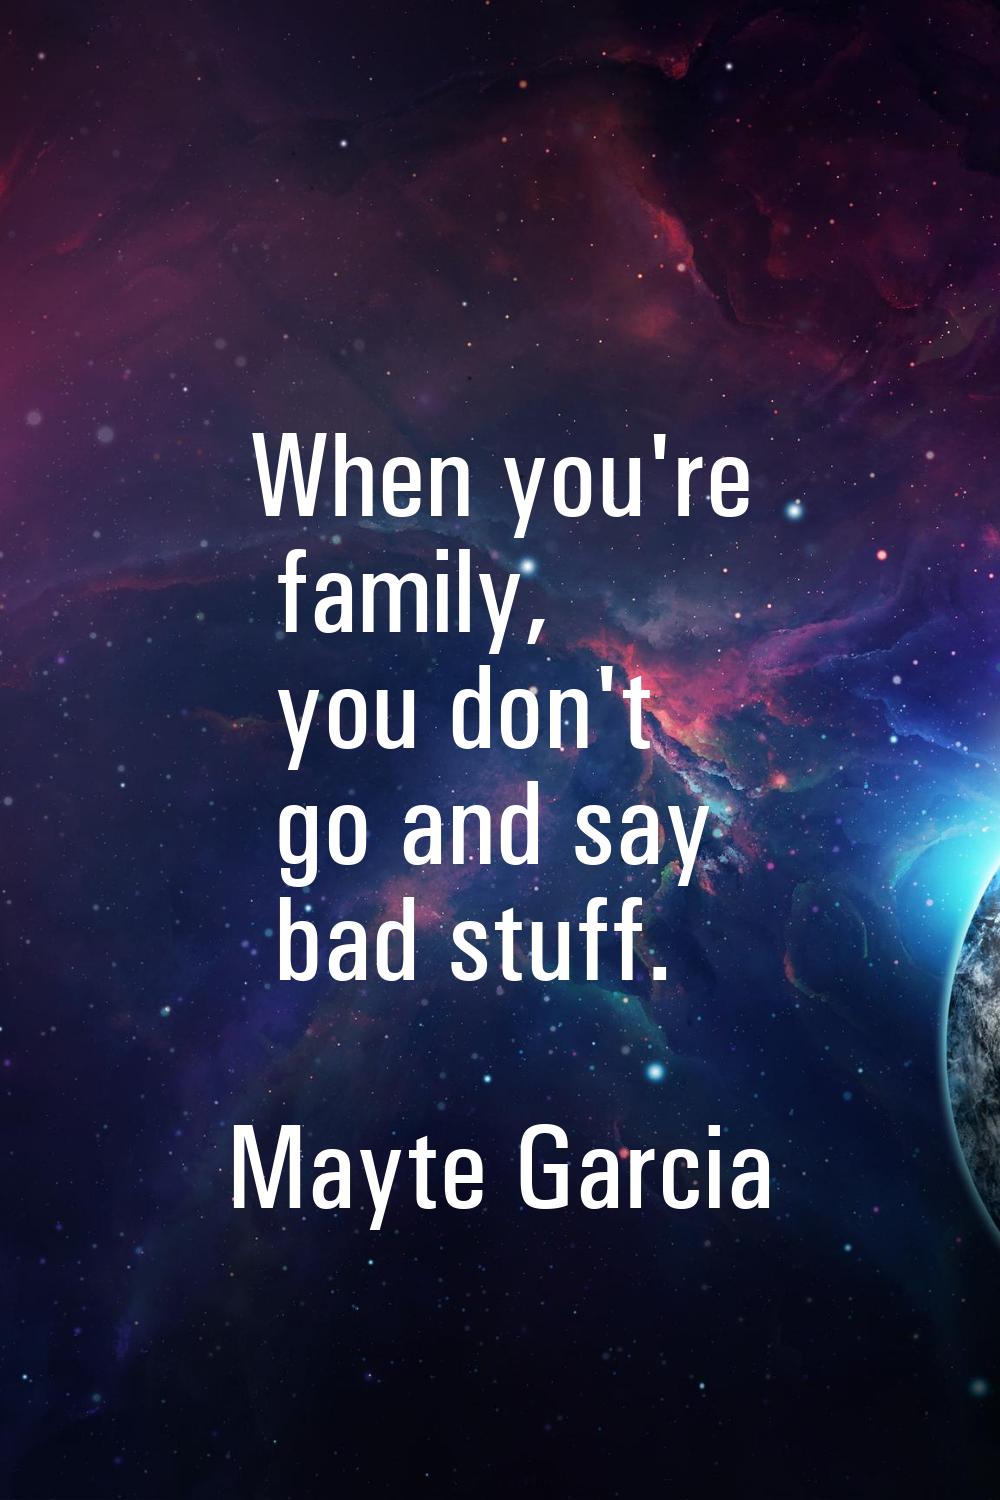 When you're family, you don't go and say bad stuff.